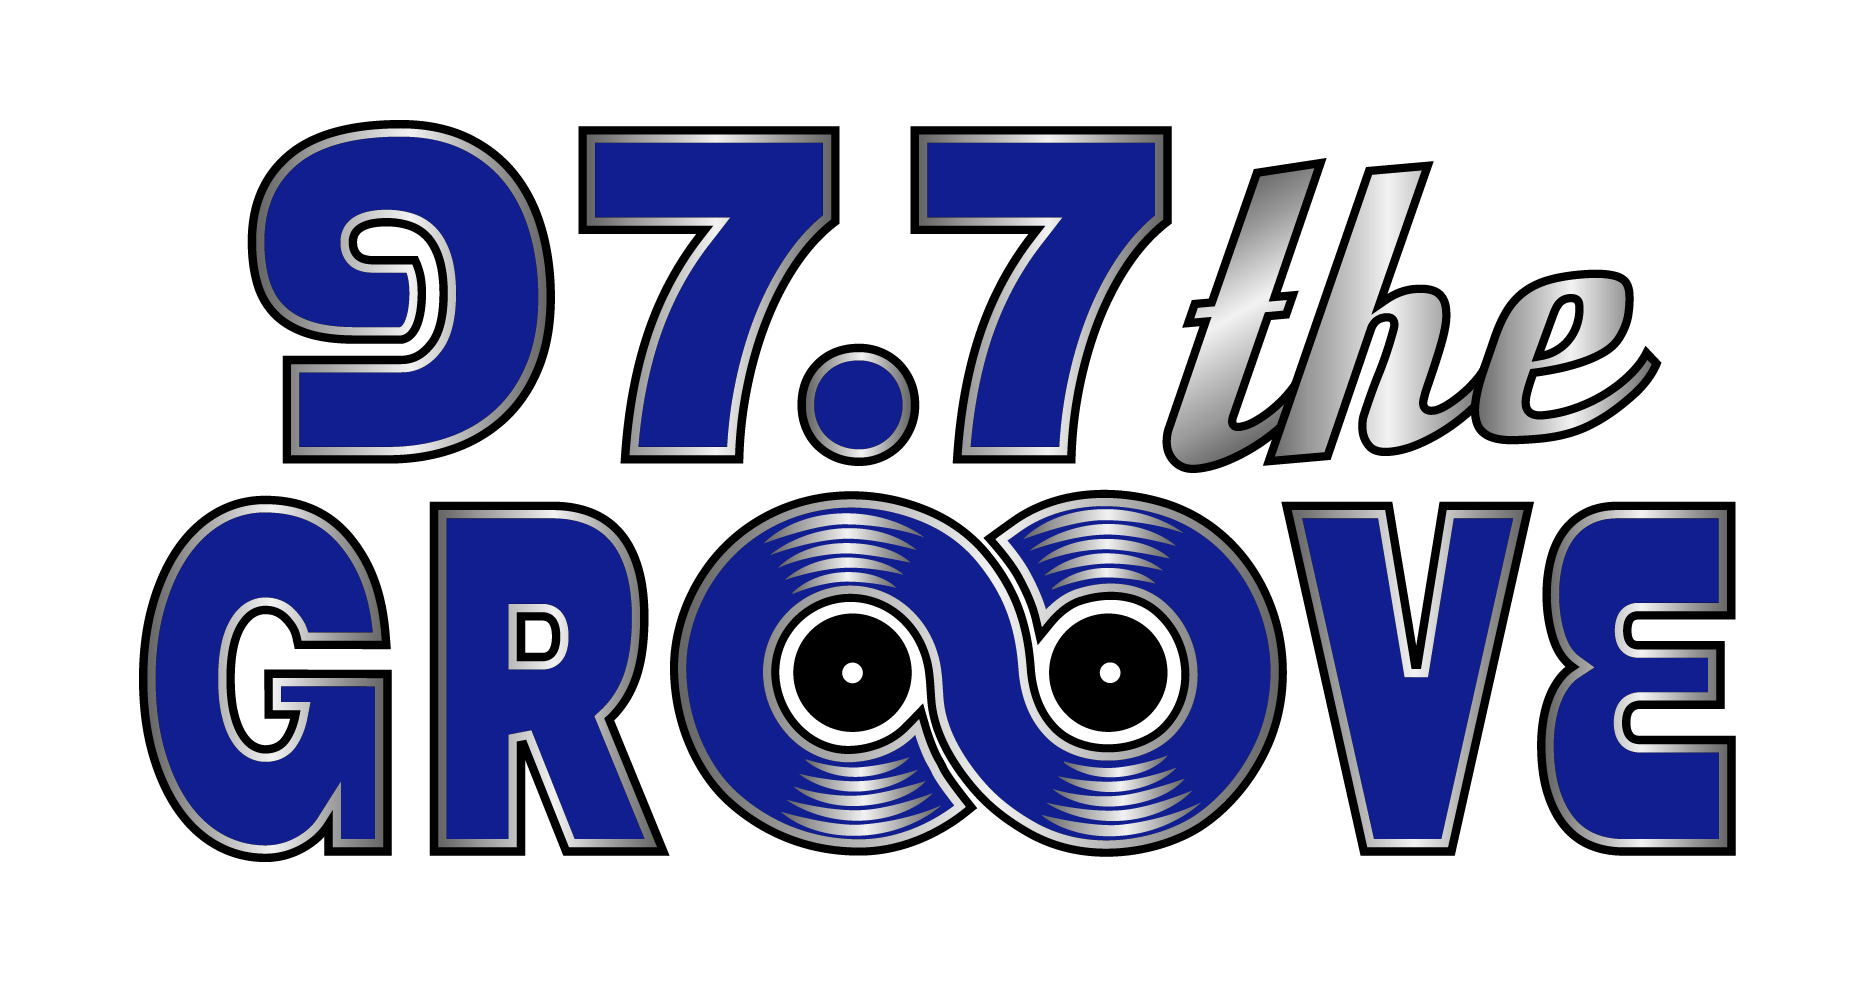 97.7 The Groove